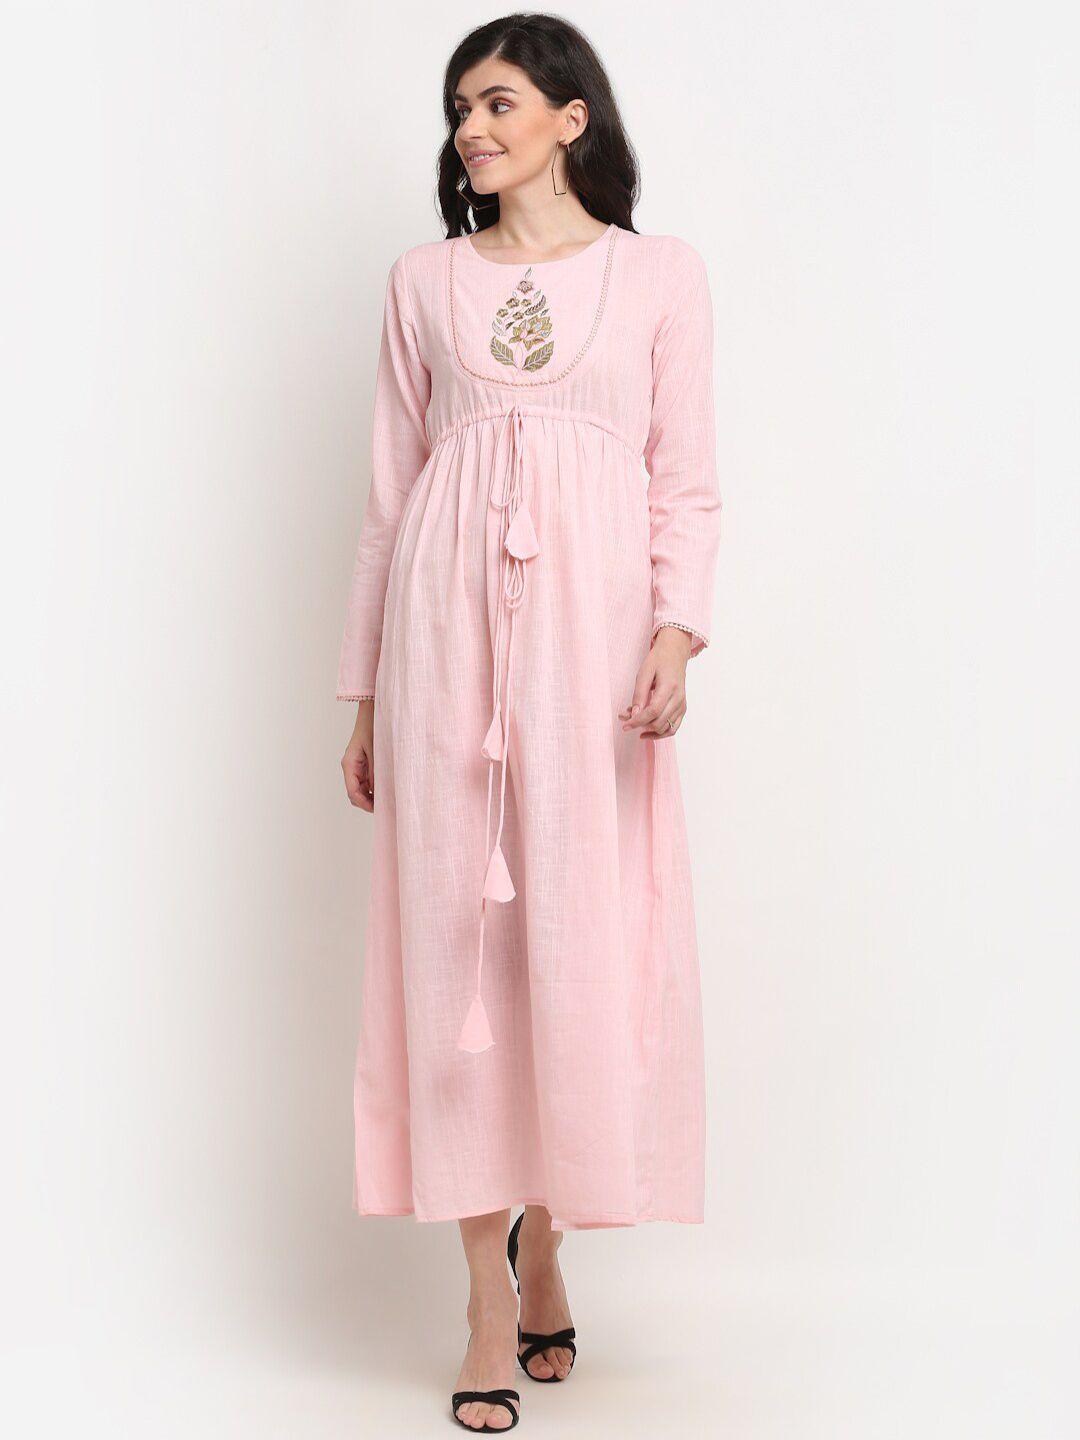 la-zoire-pink-embroidered-fit-&-flare-maxi-dress